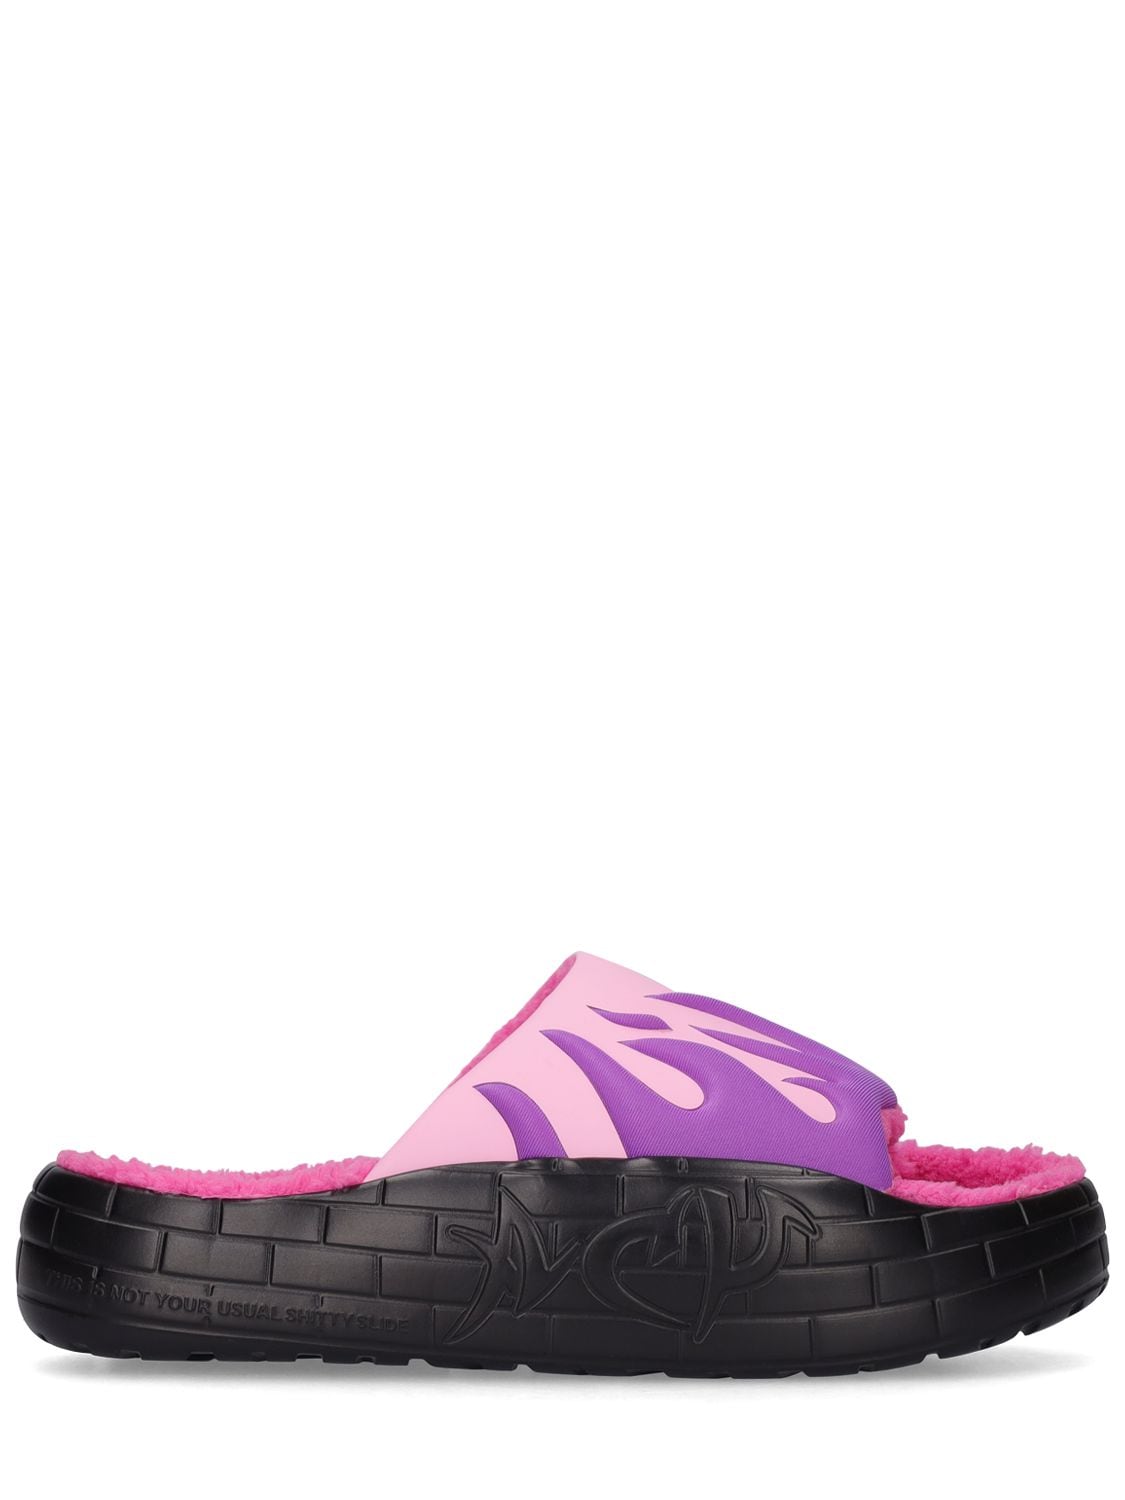 Acupuncture Nyu Flames Rubber Slide Sandals In Purple,pink